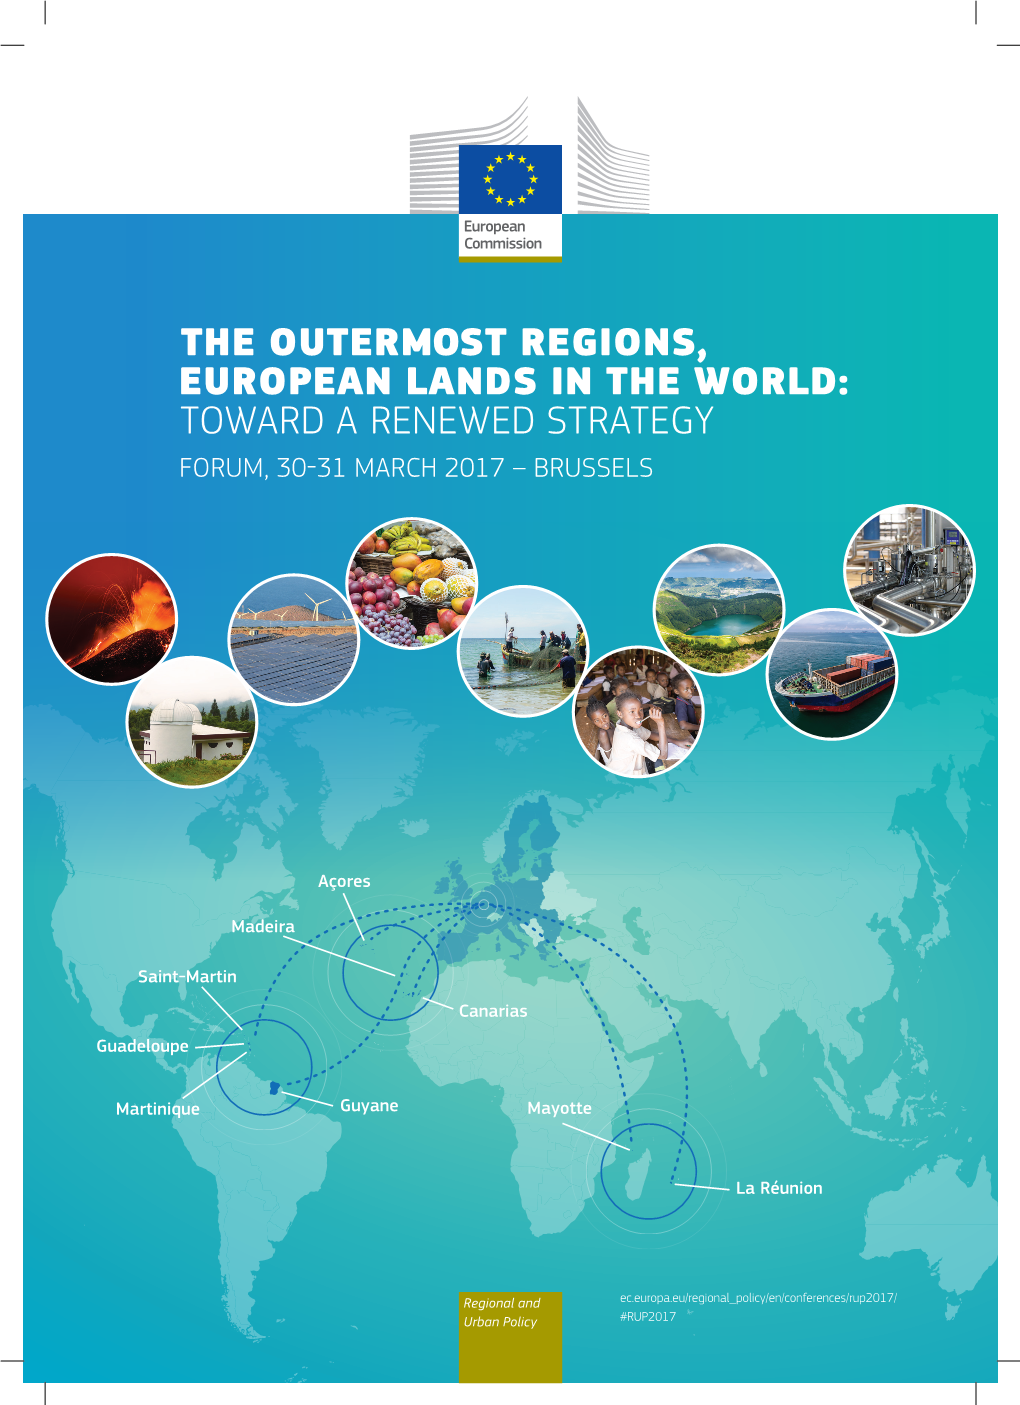 The Outermost Regions, European Lands in the World: Toward a Renewed Strategy Forum, 30-31 March 2017 – Brussels